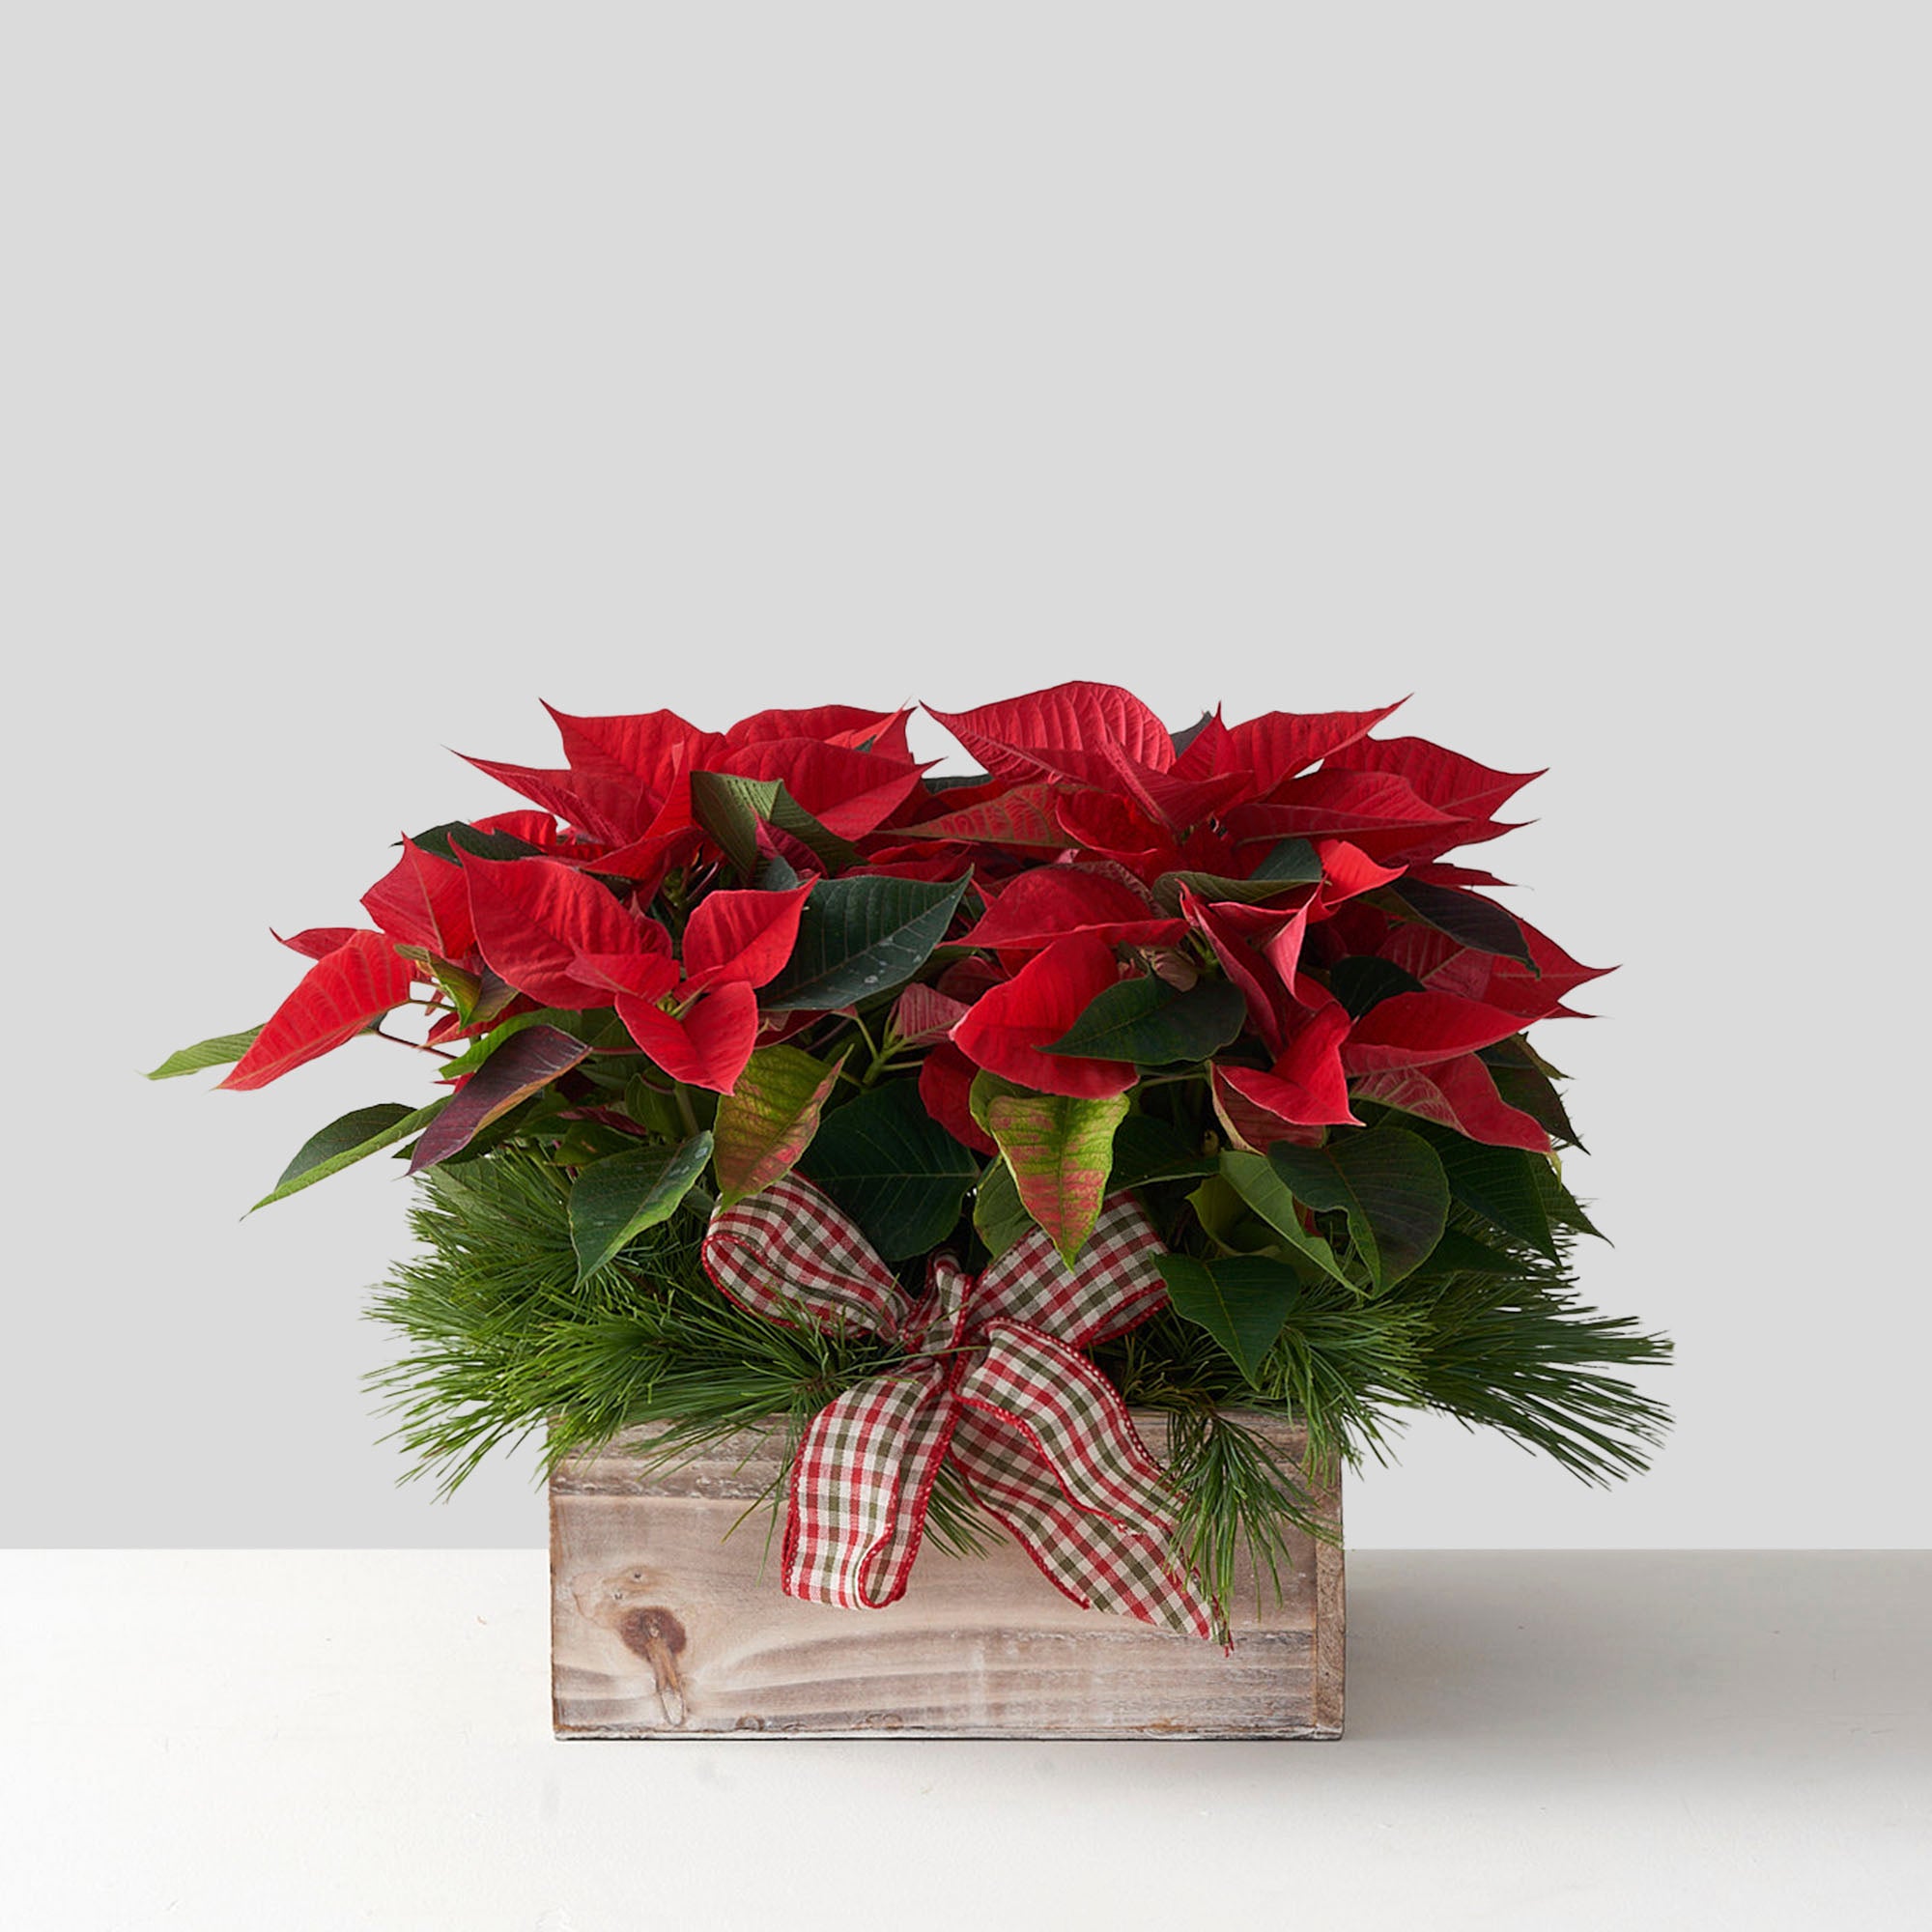 Red poinsettia bland in wooden box with pine boughs and red and green plaid ribbon.